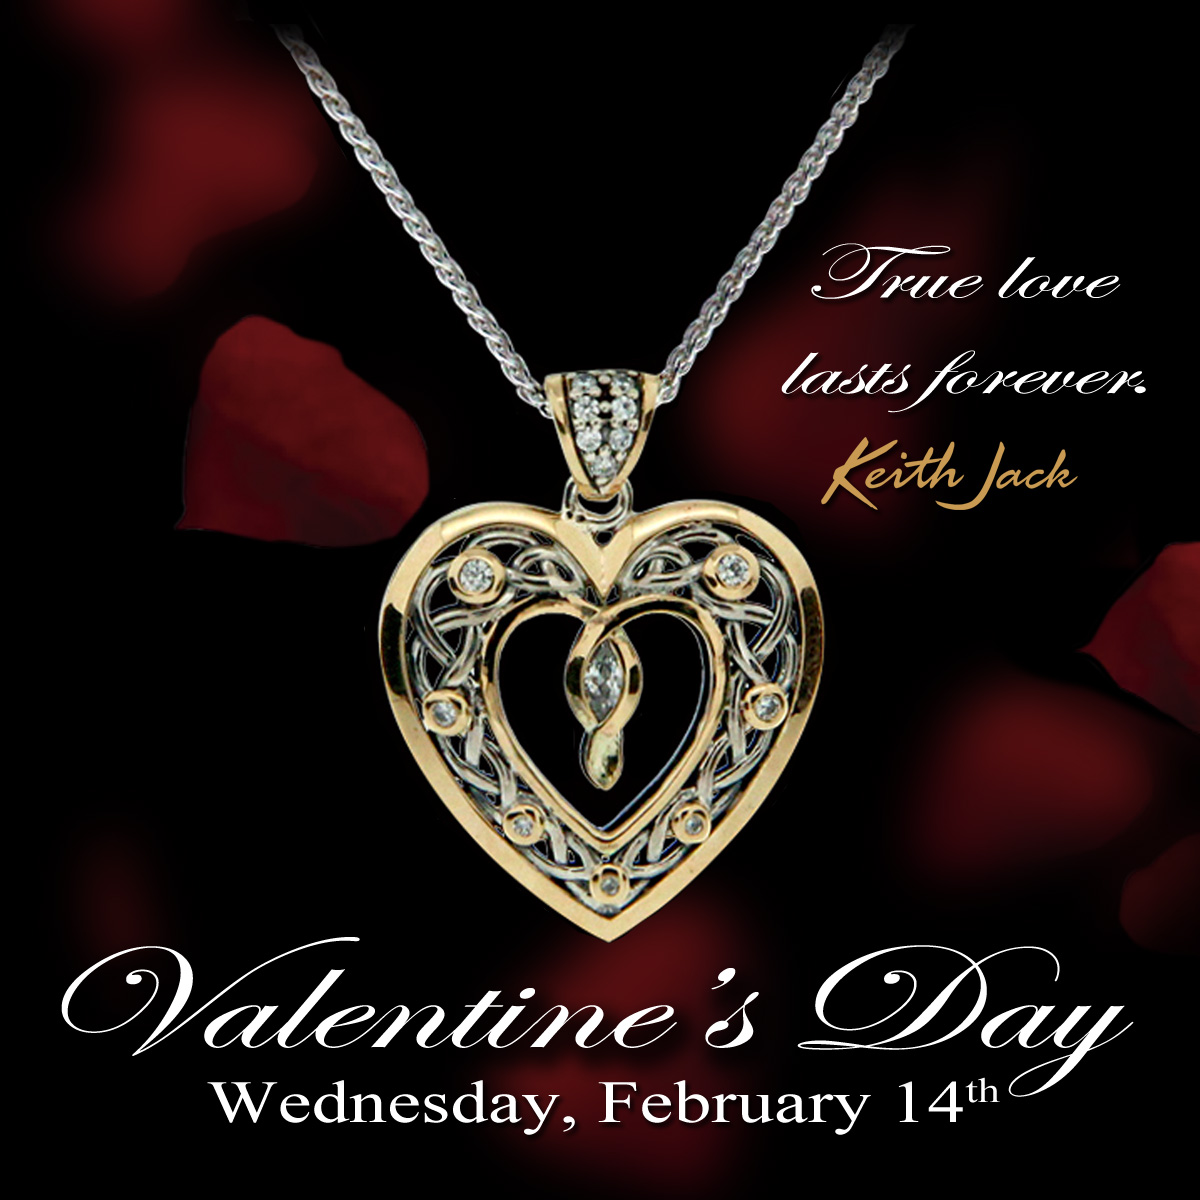 Purdys News And Events - Locket , HD Wallpaper & Backgrounds